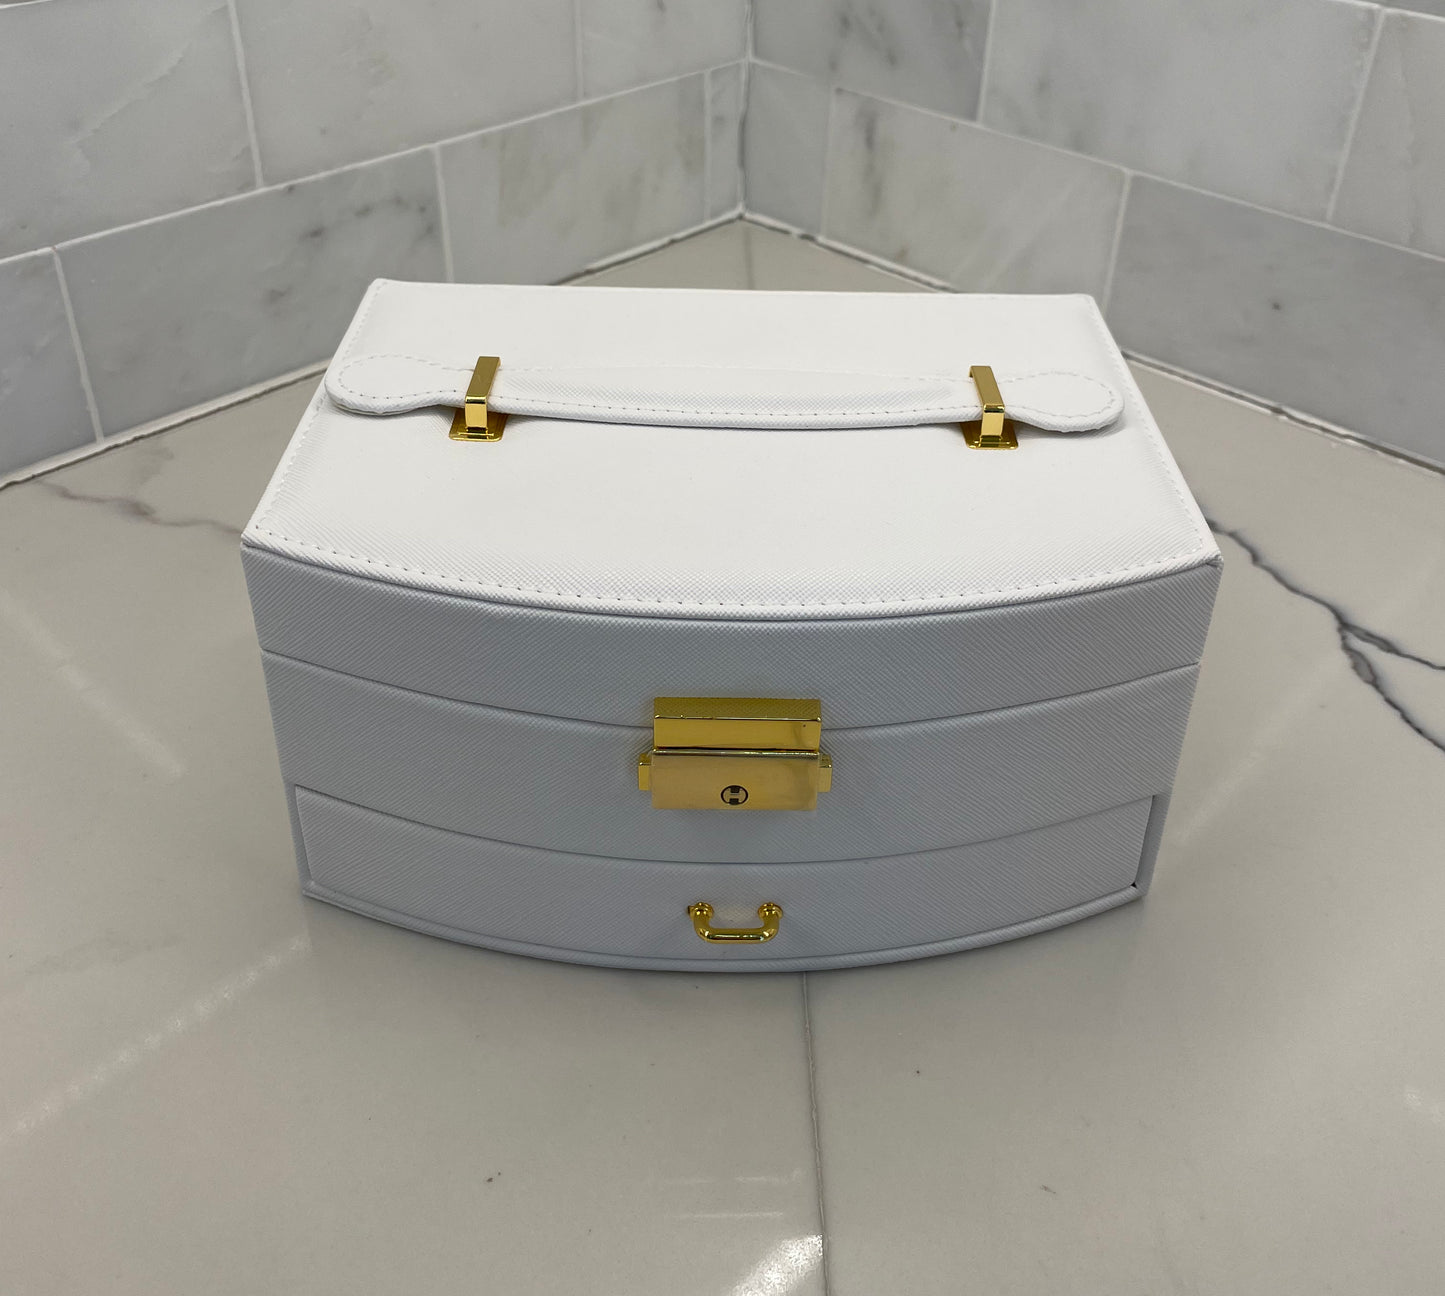 White Personalized Large Jewelry Box with Drawer, Carrying Handle, and